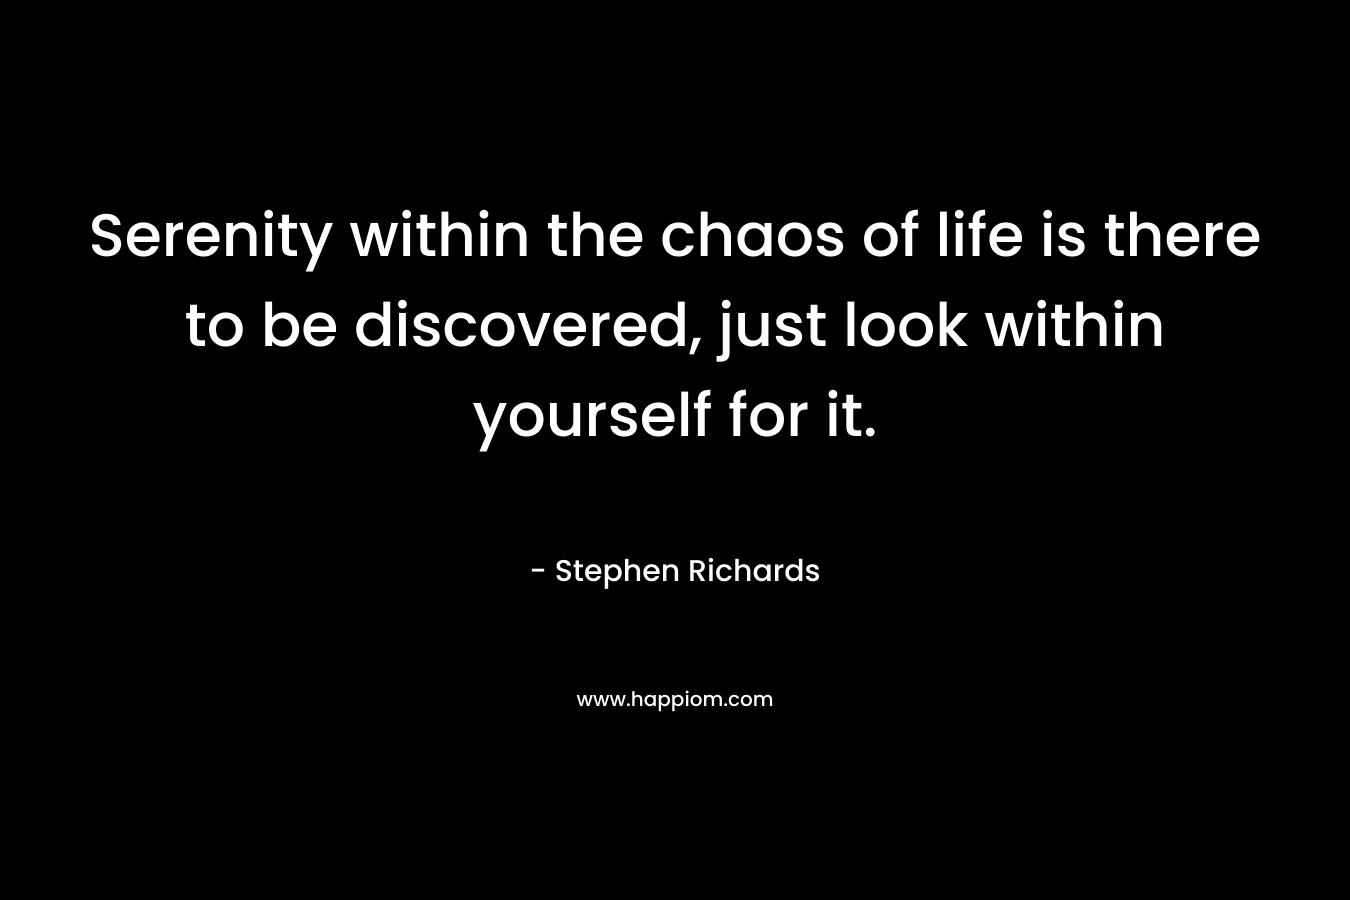 Serenity within the chaos of life is there to be discovered, just look within yourself for it.